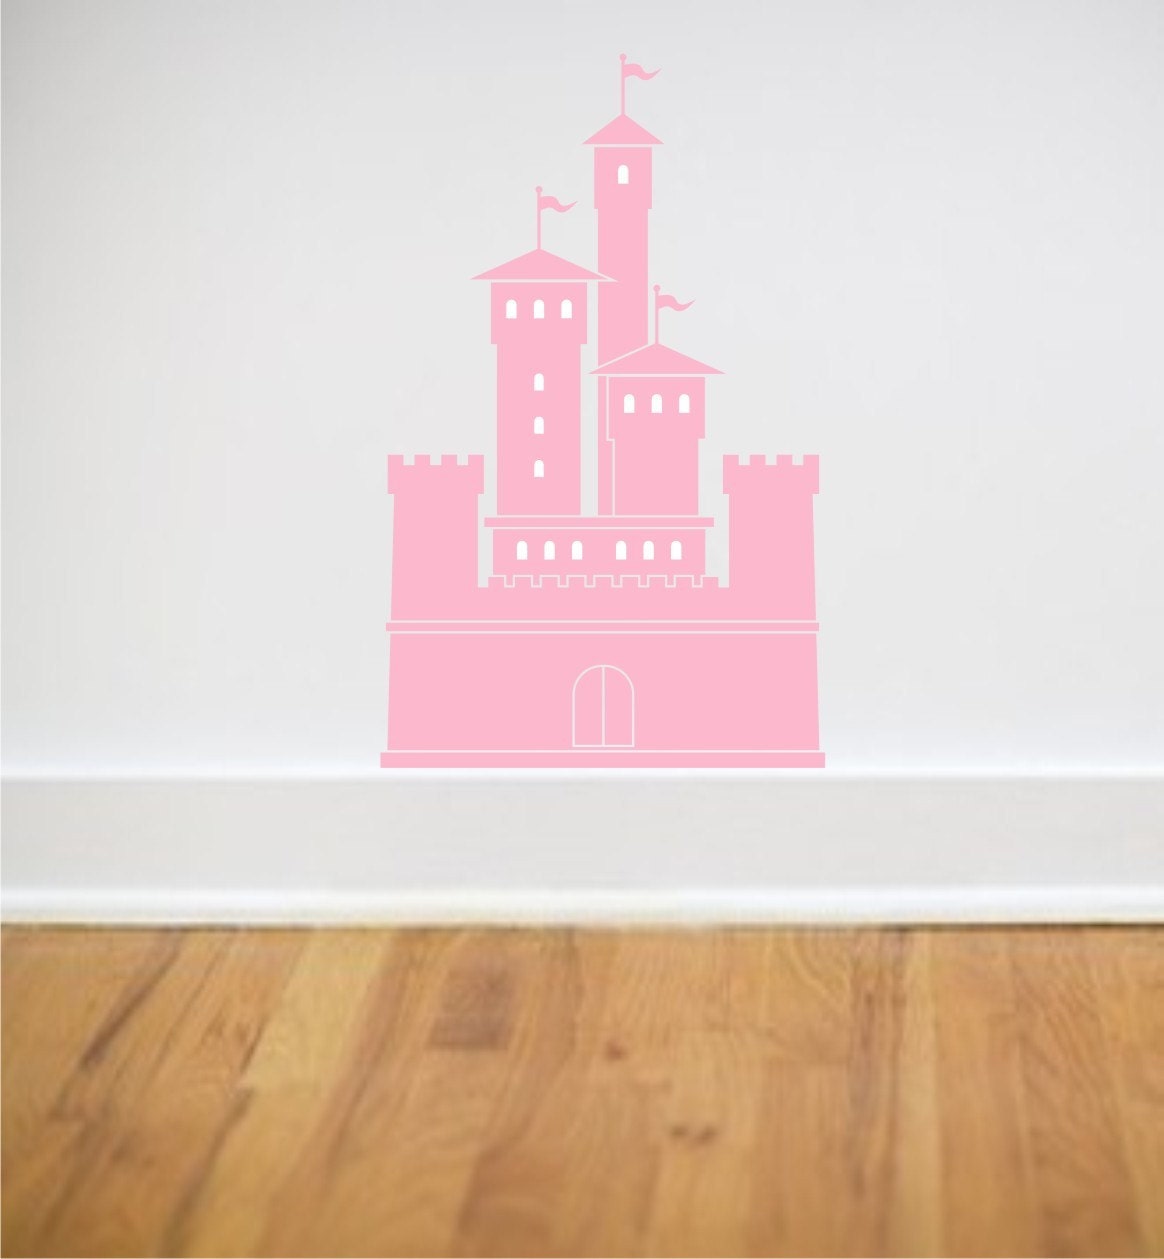 Princess Castle Wall Decal